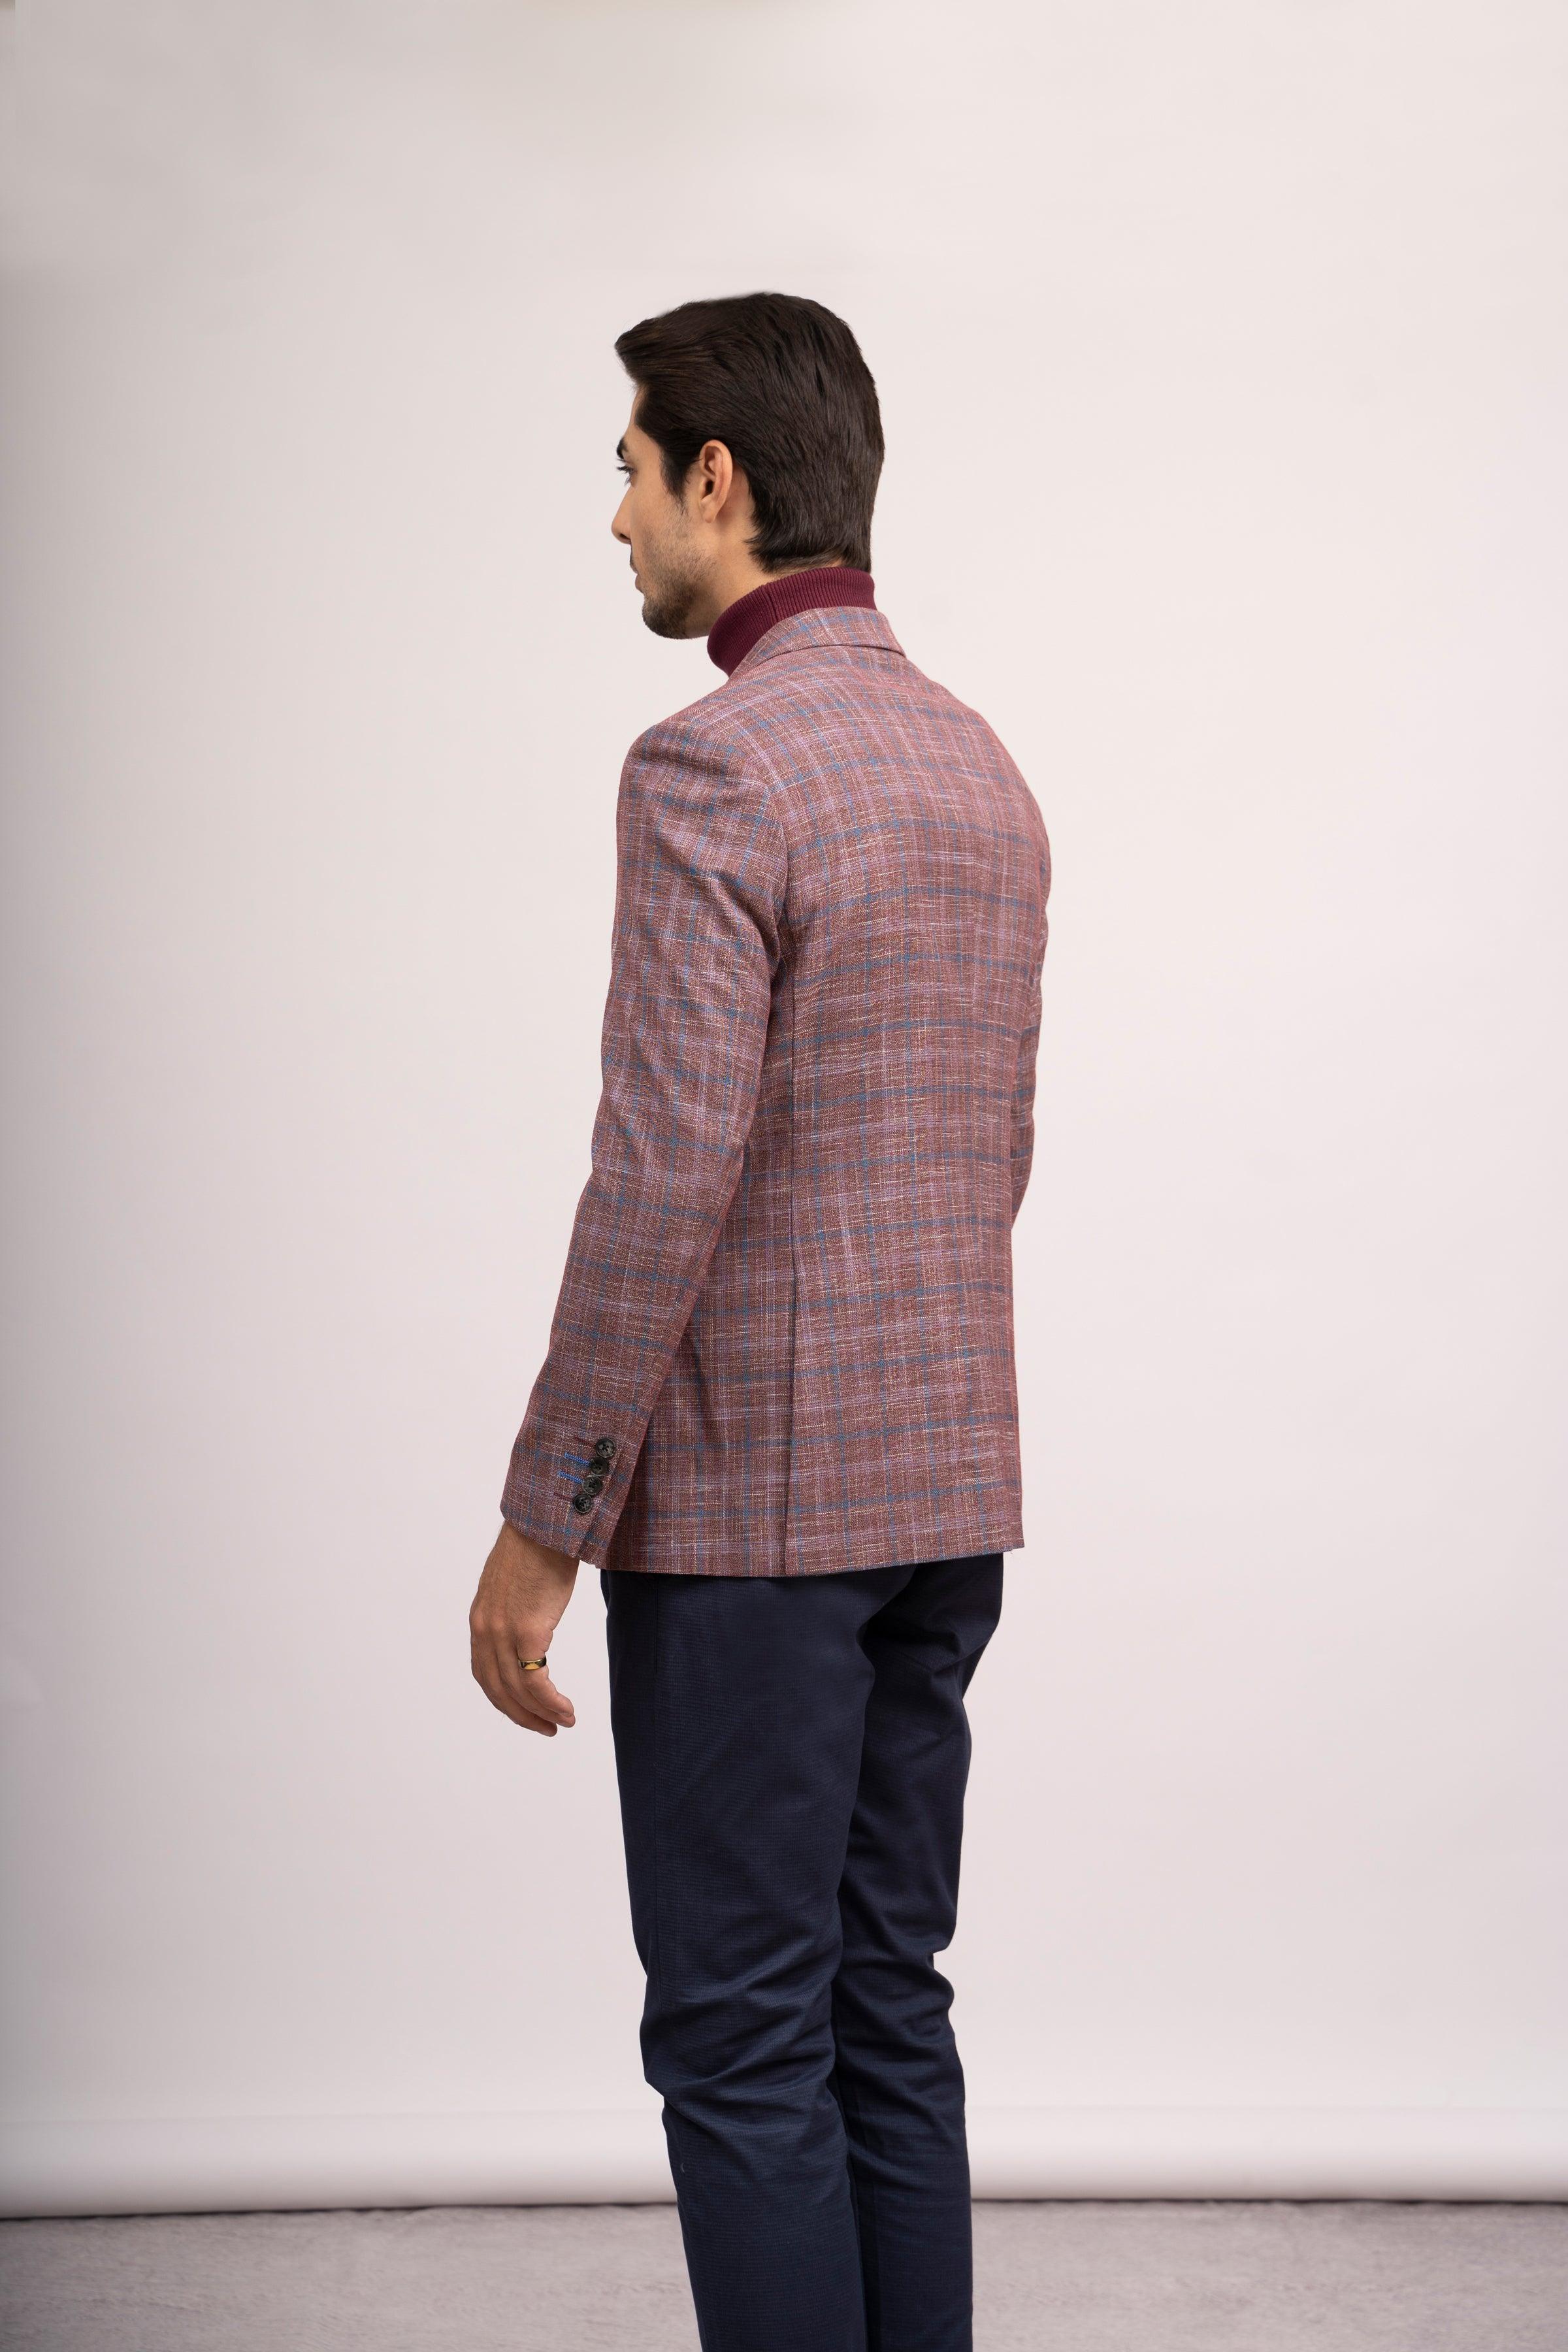 CASUAL COAT SLIM FIT MAROON at Charcoal Clothing